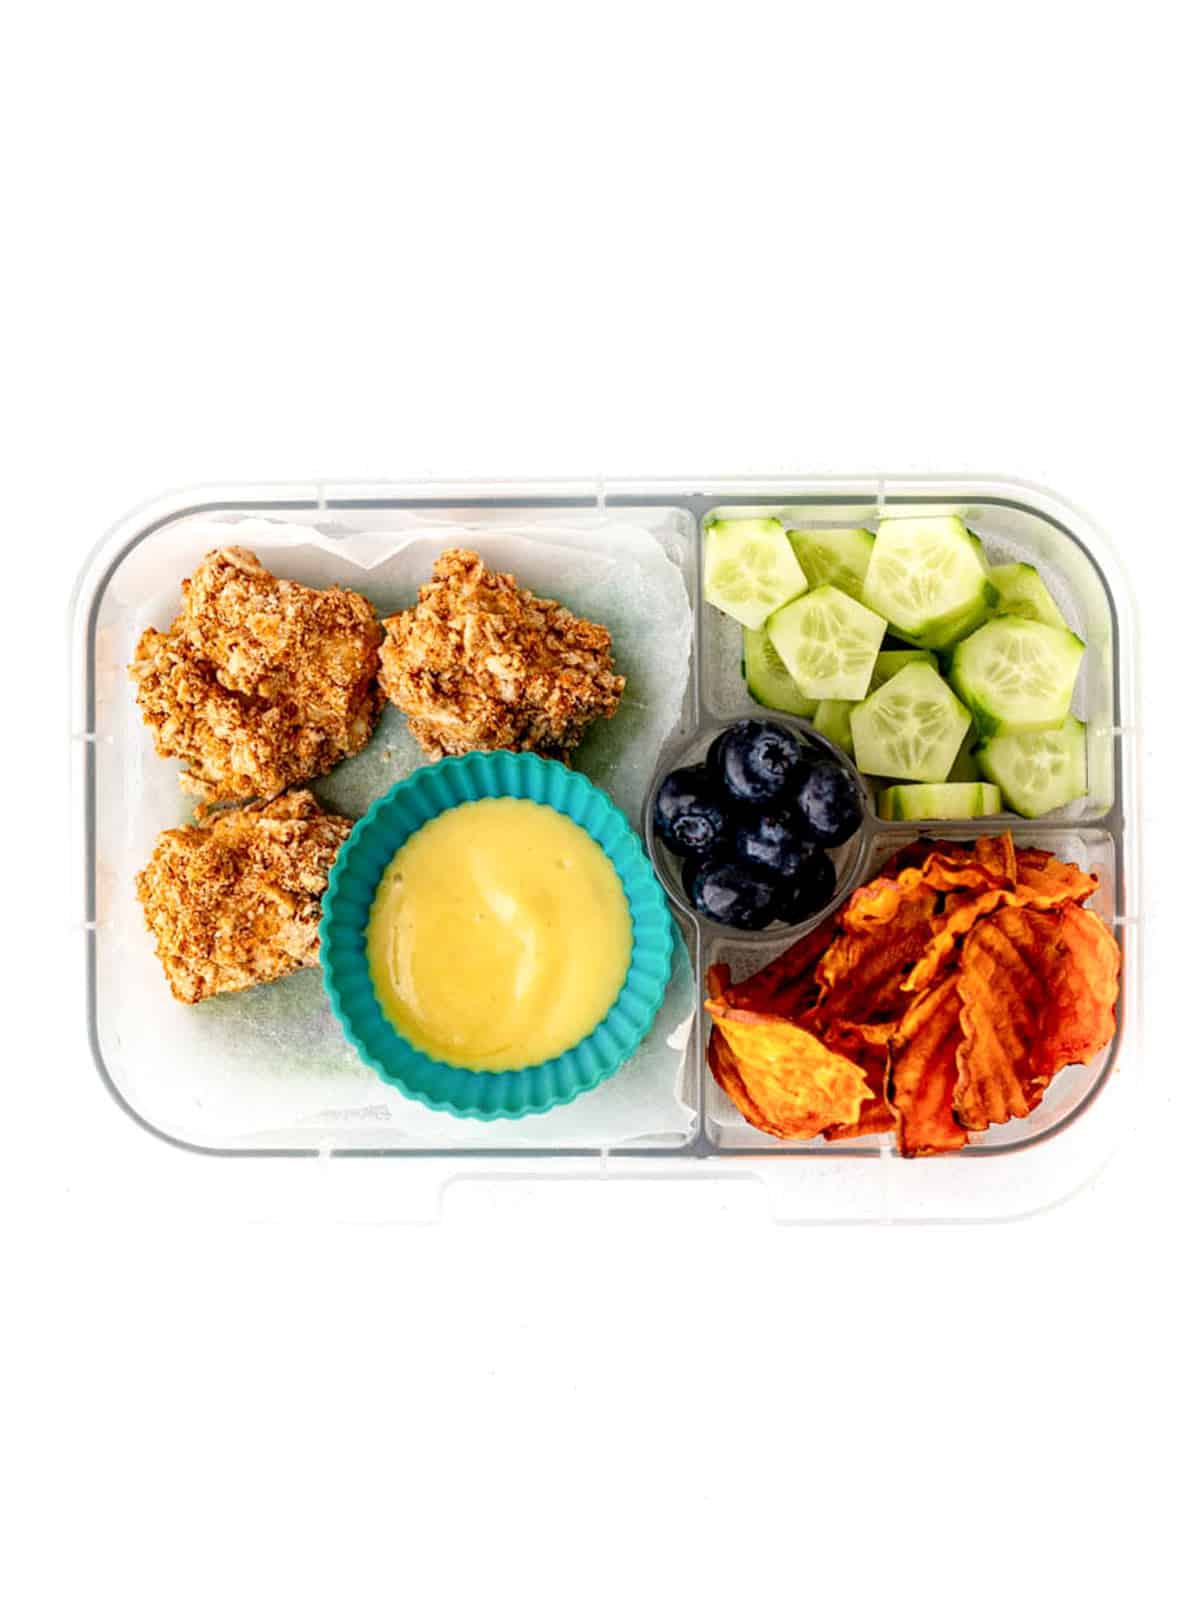 A lunch box with leftover air fryer chicken bites, honey mustard dip, baked sweet potato chips, cucumber slices and blueberries.